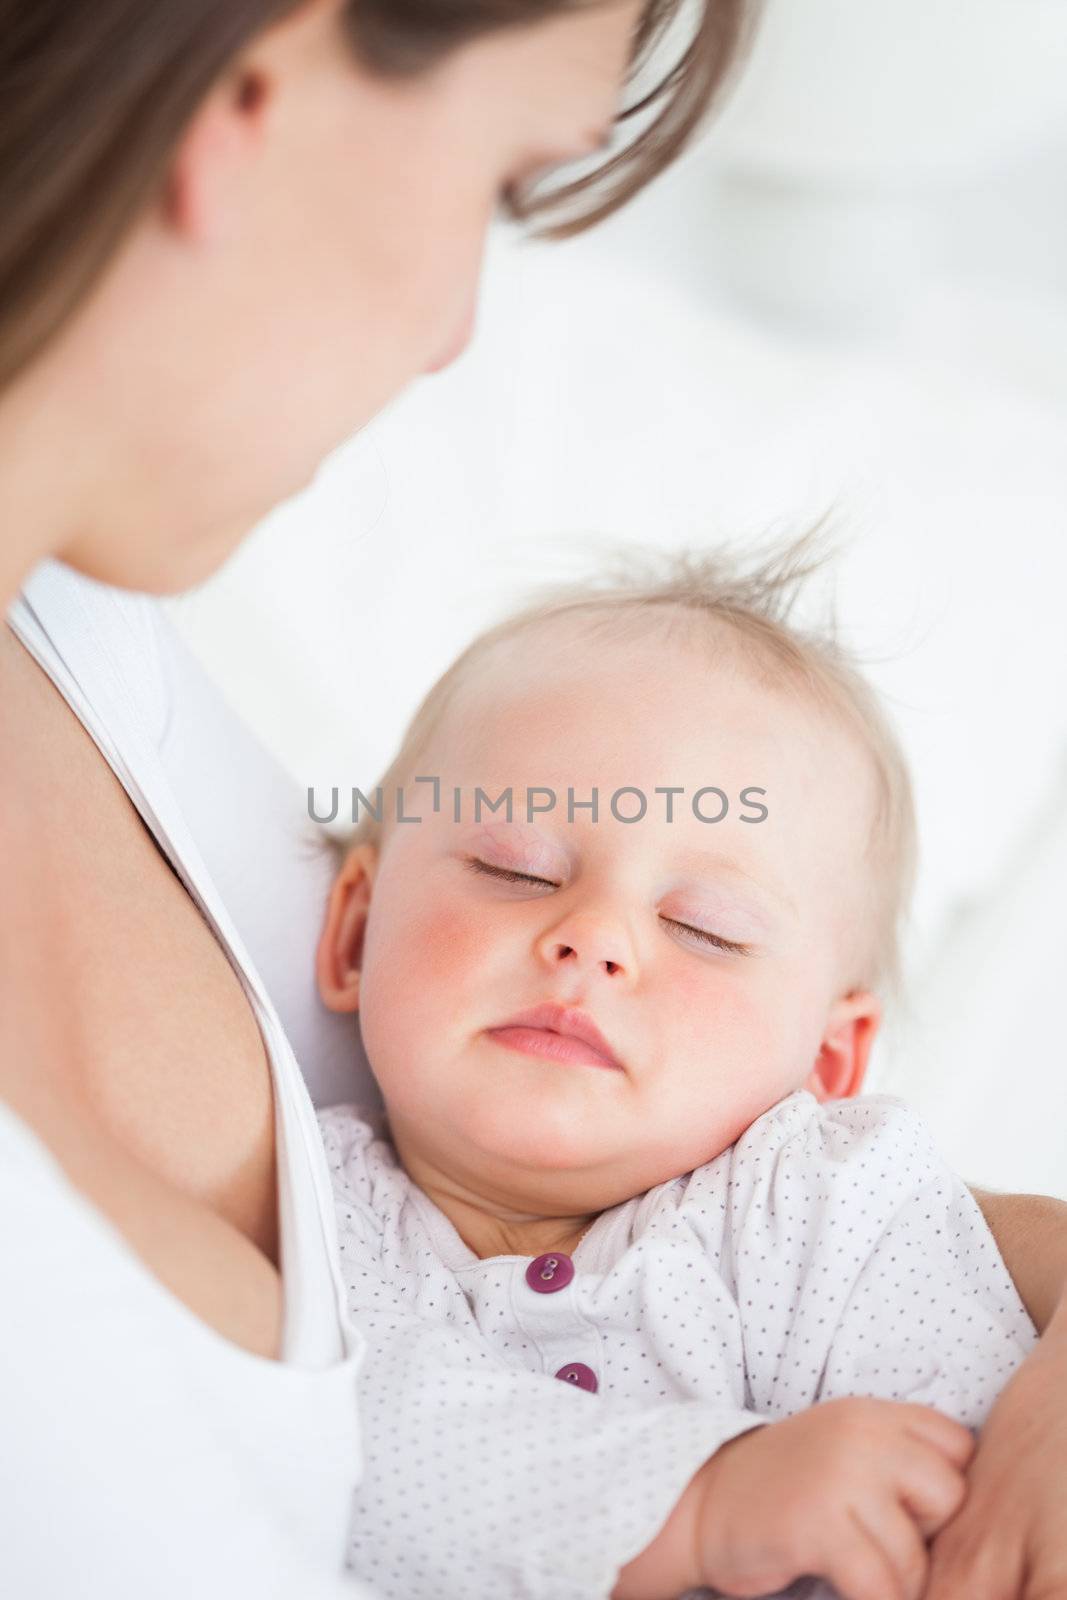 Cute baby sleeping in the arms of her mother in a bedroom